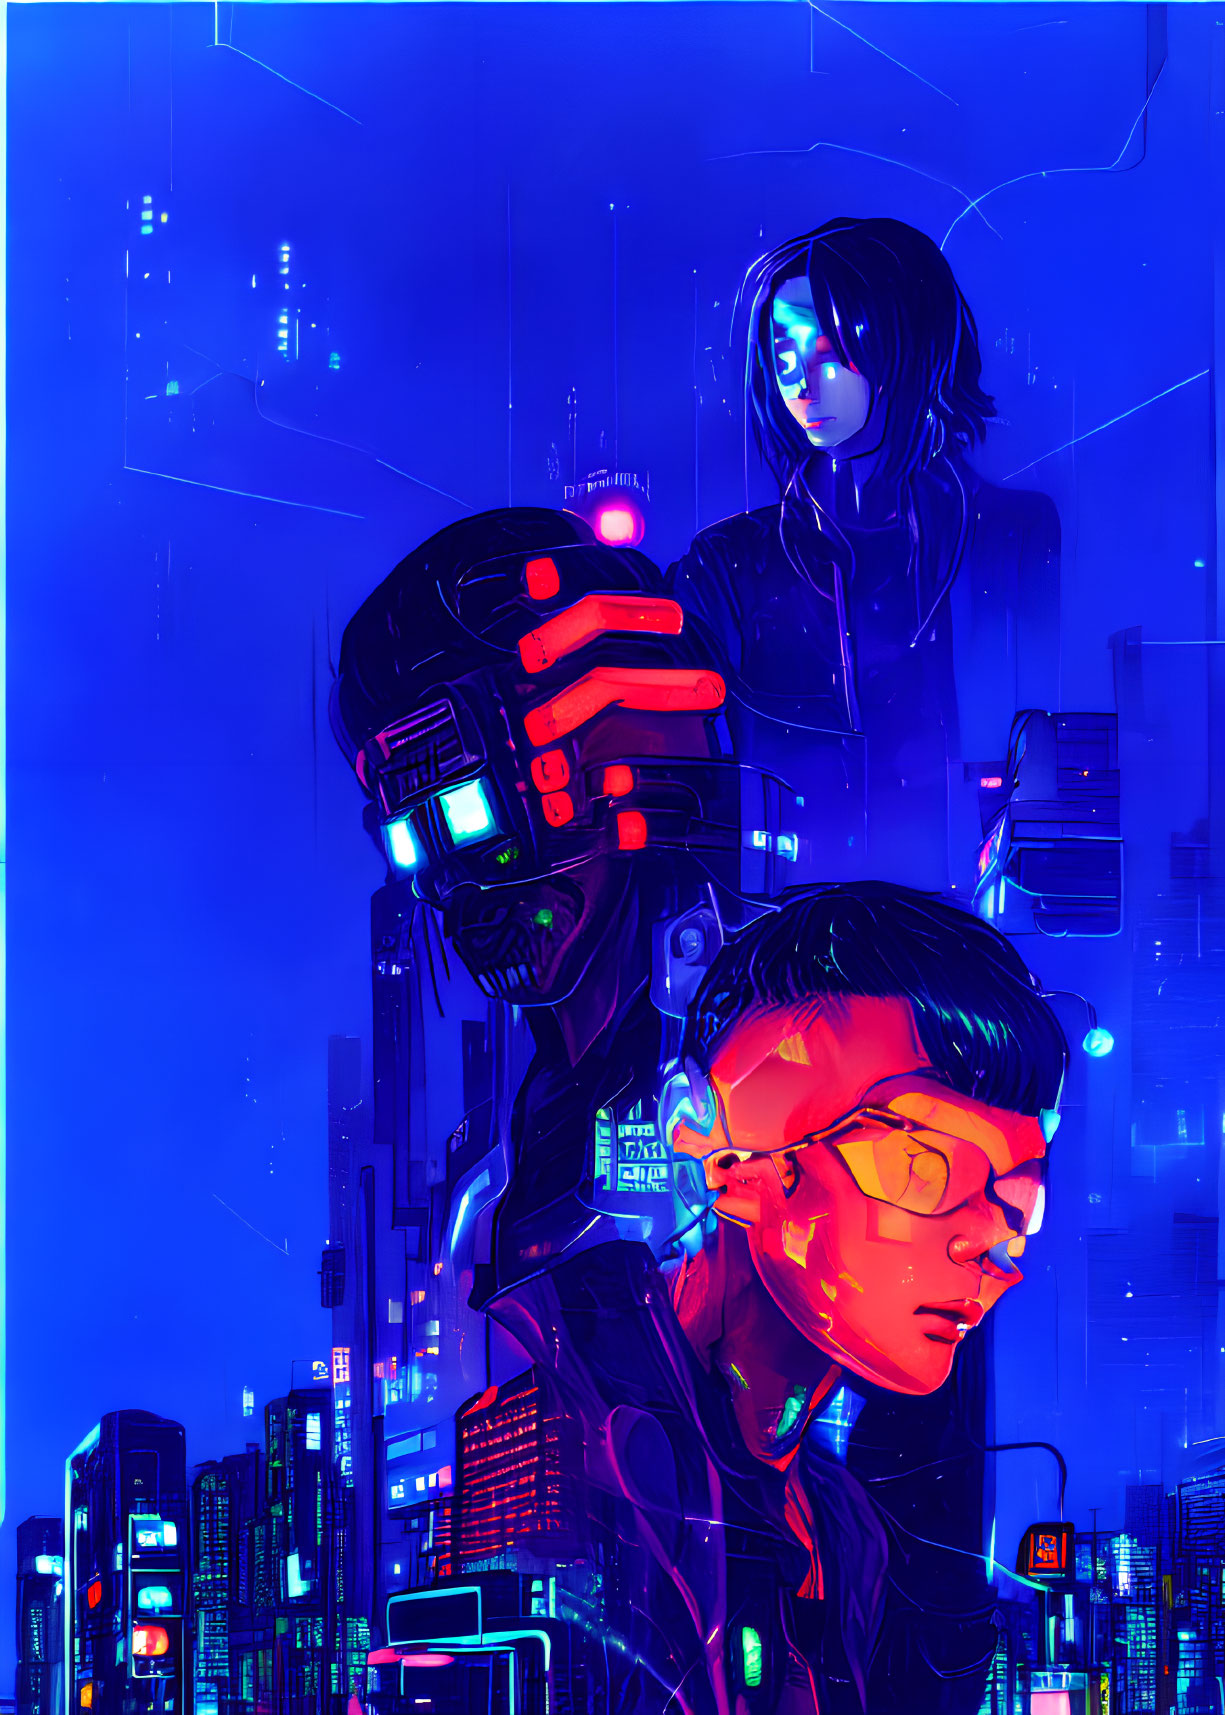 Cyberpunk-themed illustration of two characters in neon against futuristic cityscape